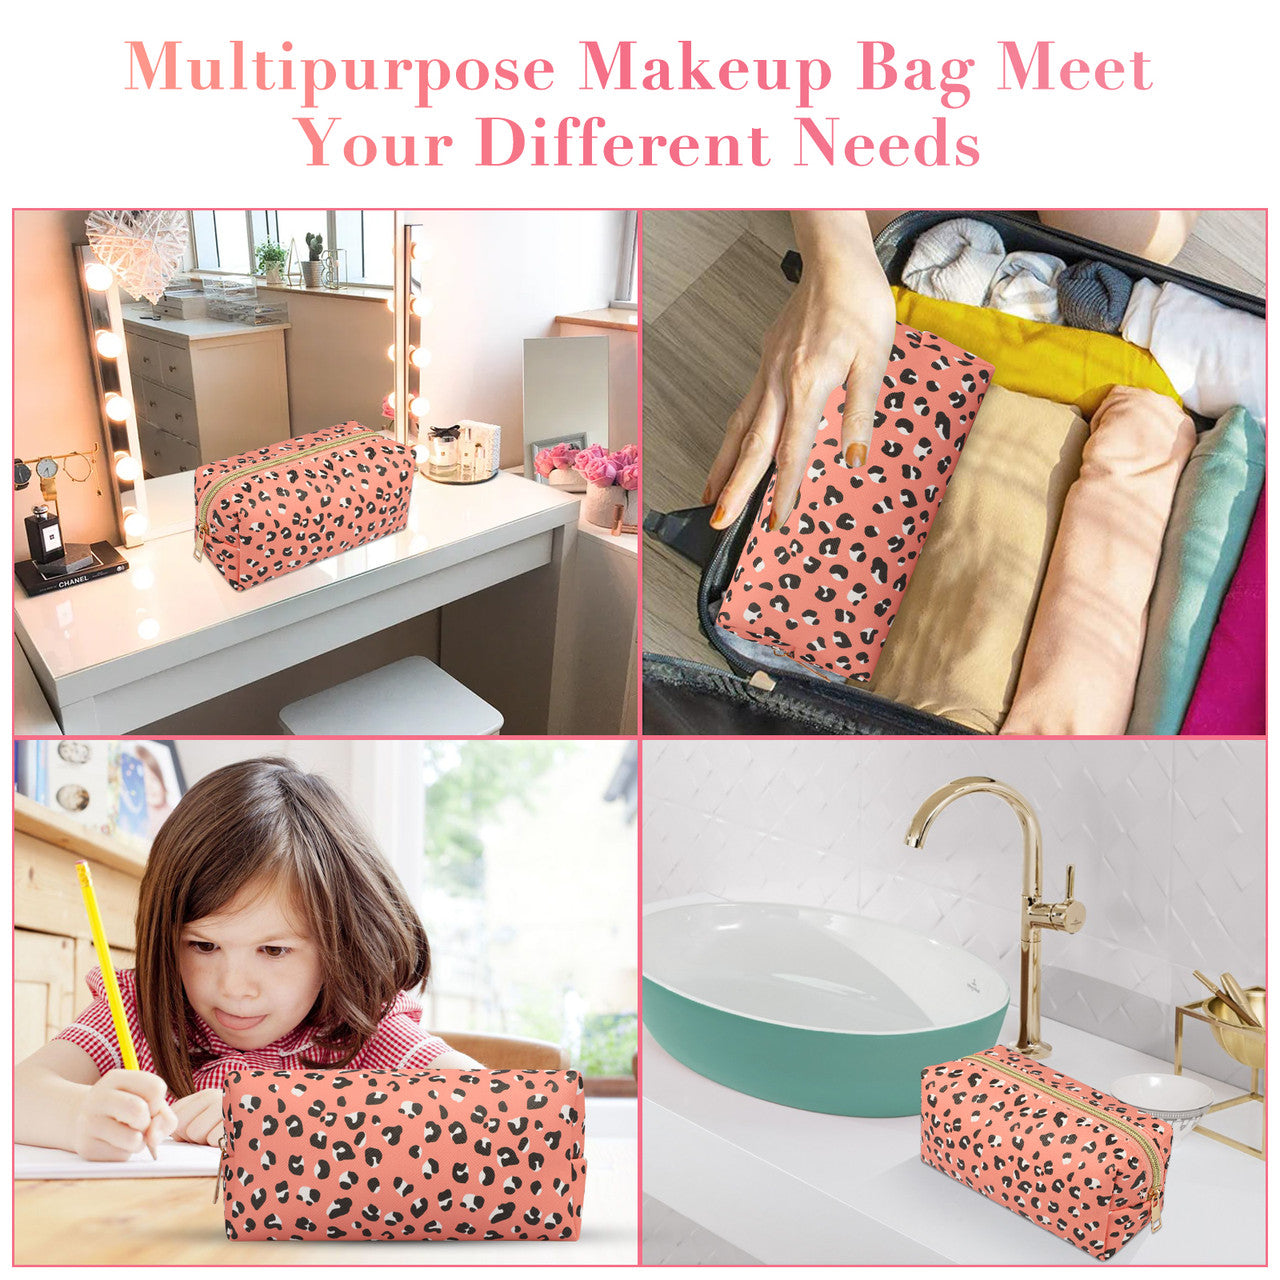 Leopard Print Travel Waterproof Cosmetic Bag with a Large Capacity to Hiold all your Cosmetics